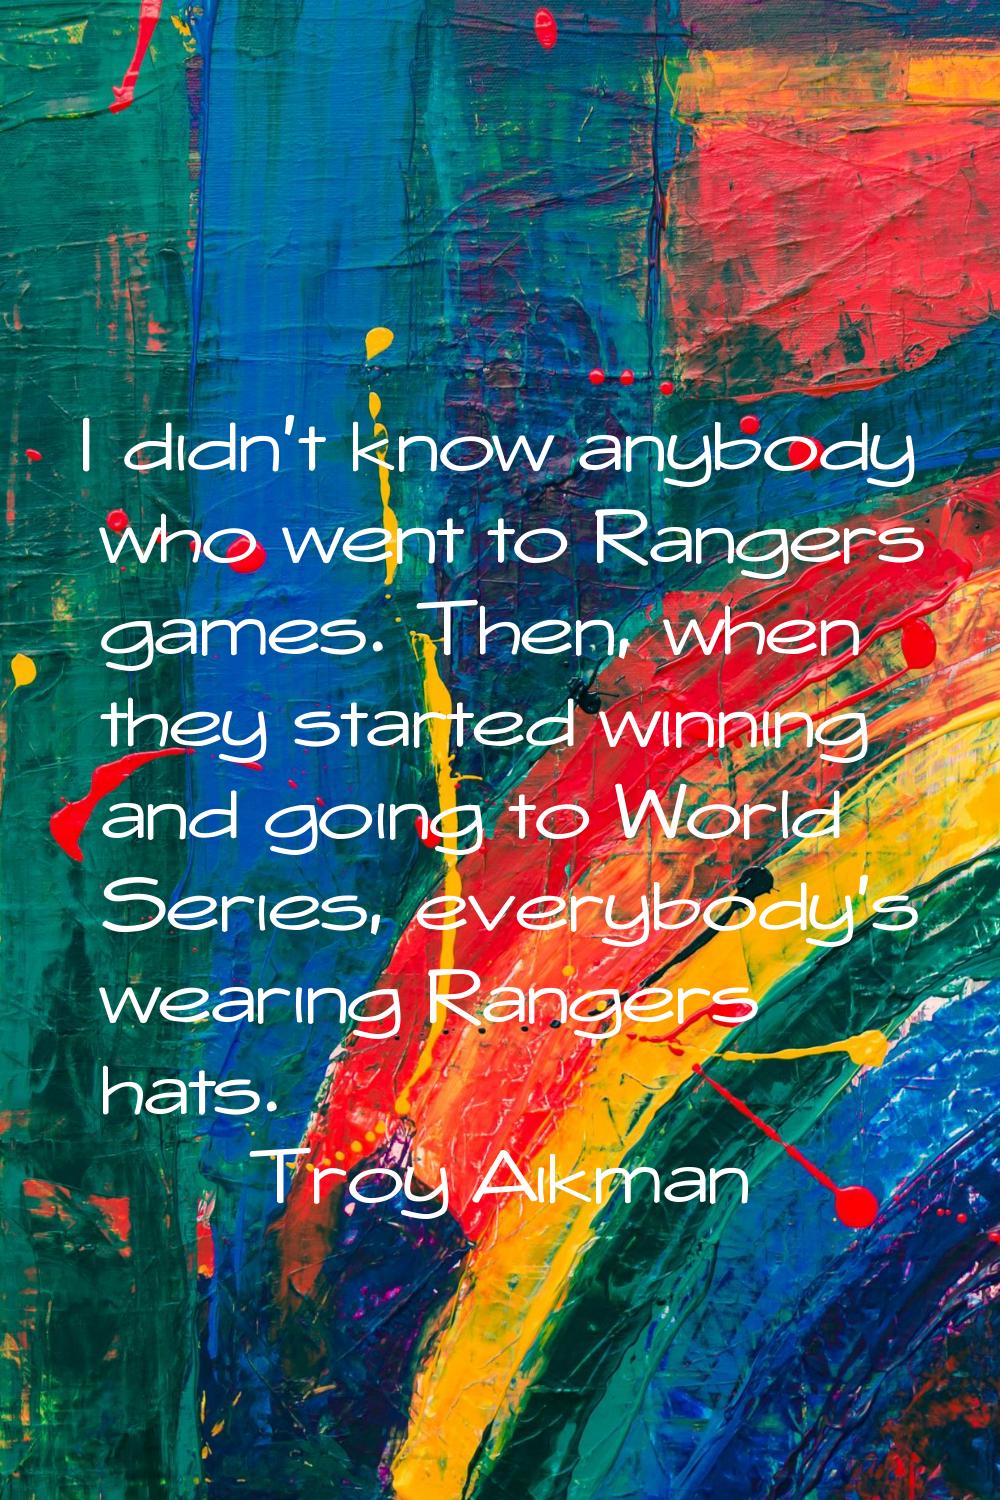 I didn't know anybody who went to Rangers games. Then, when they started winning and going to World